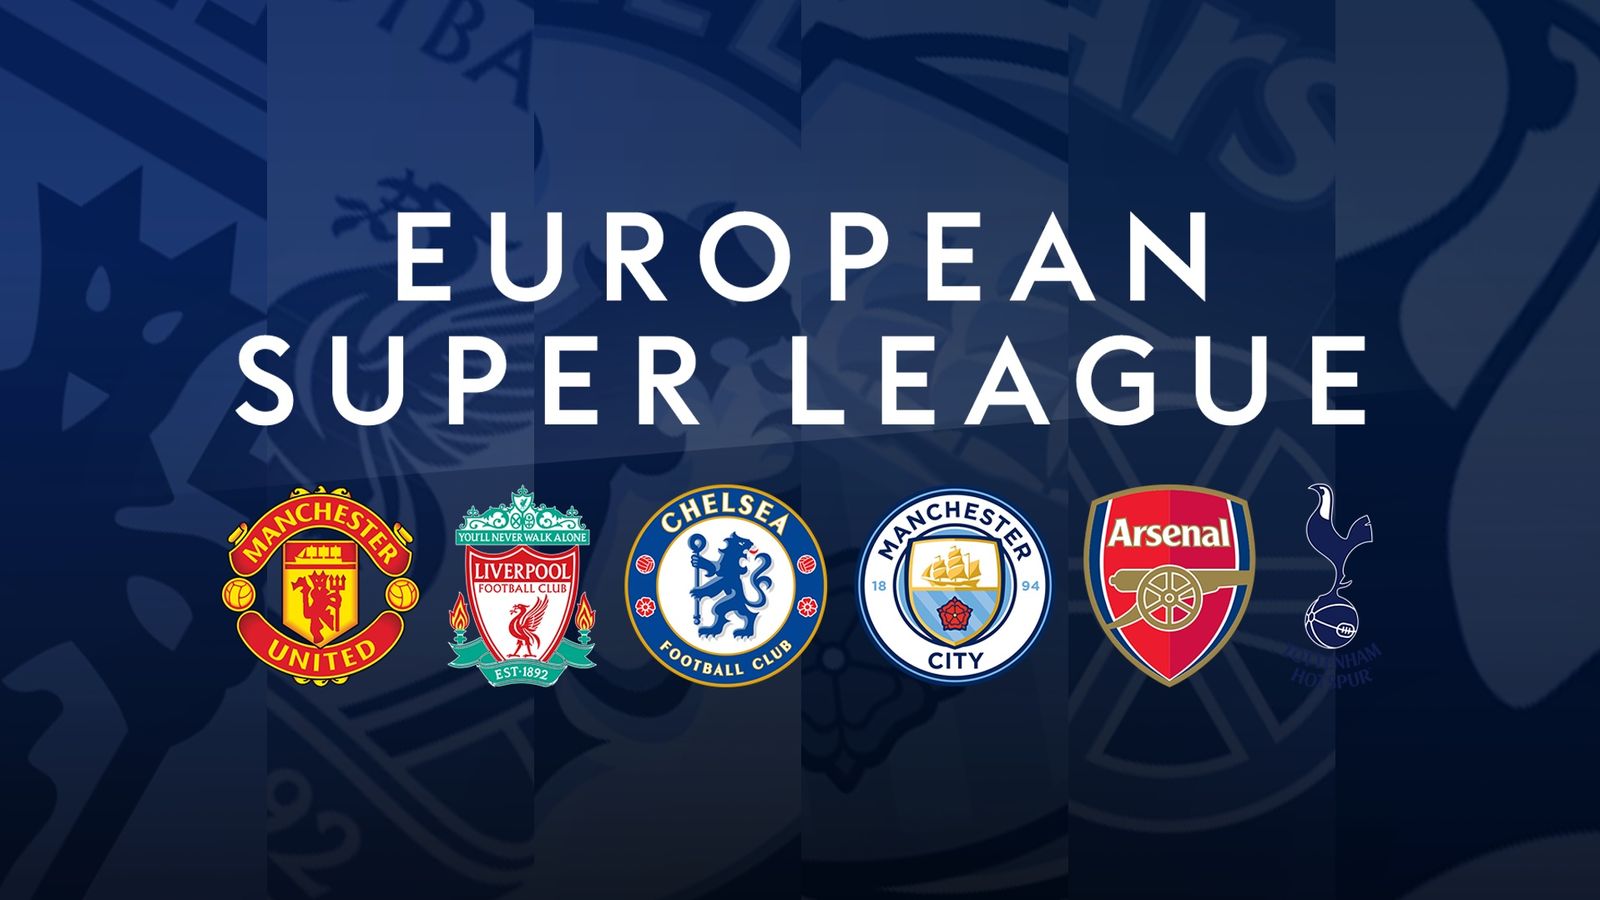 European Super League - the key questions: What is it? Who is